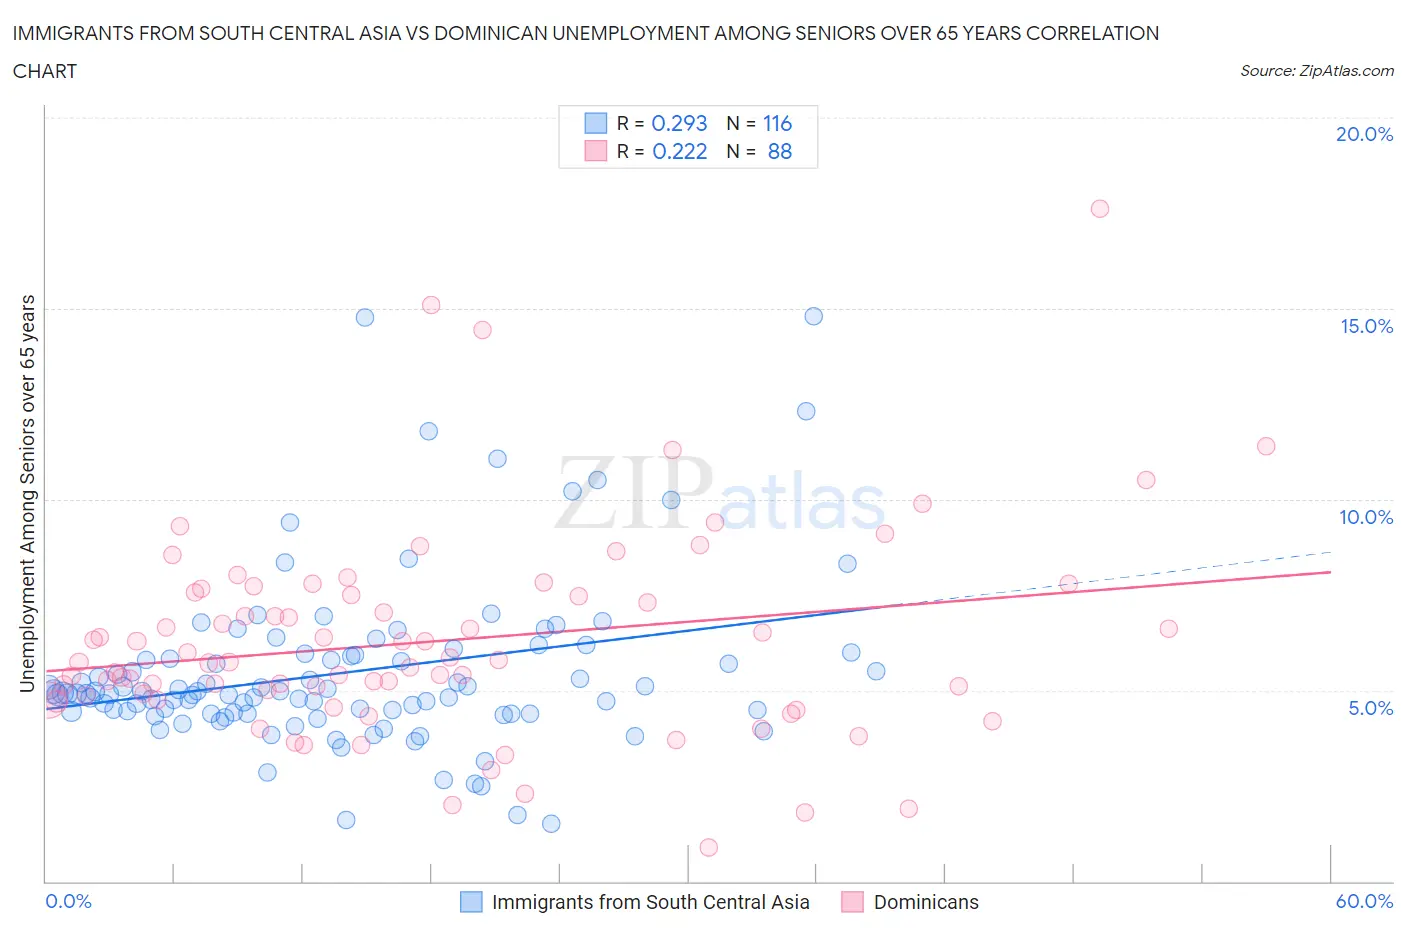 Immigrants from South Central Asia vs Dominican Unemployment Among Seniors over 65 years